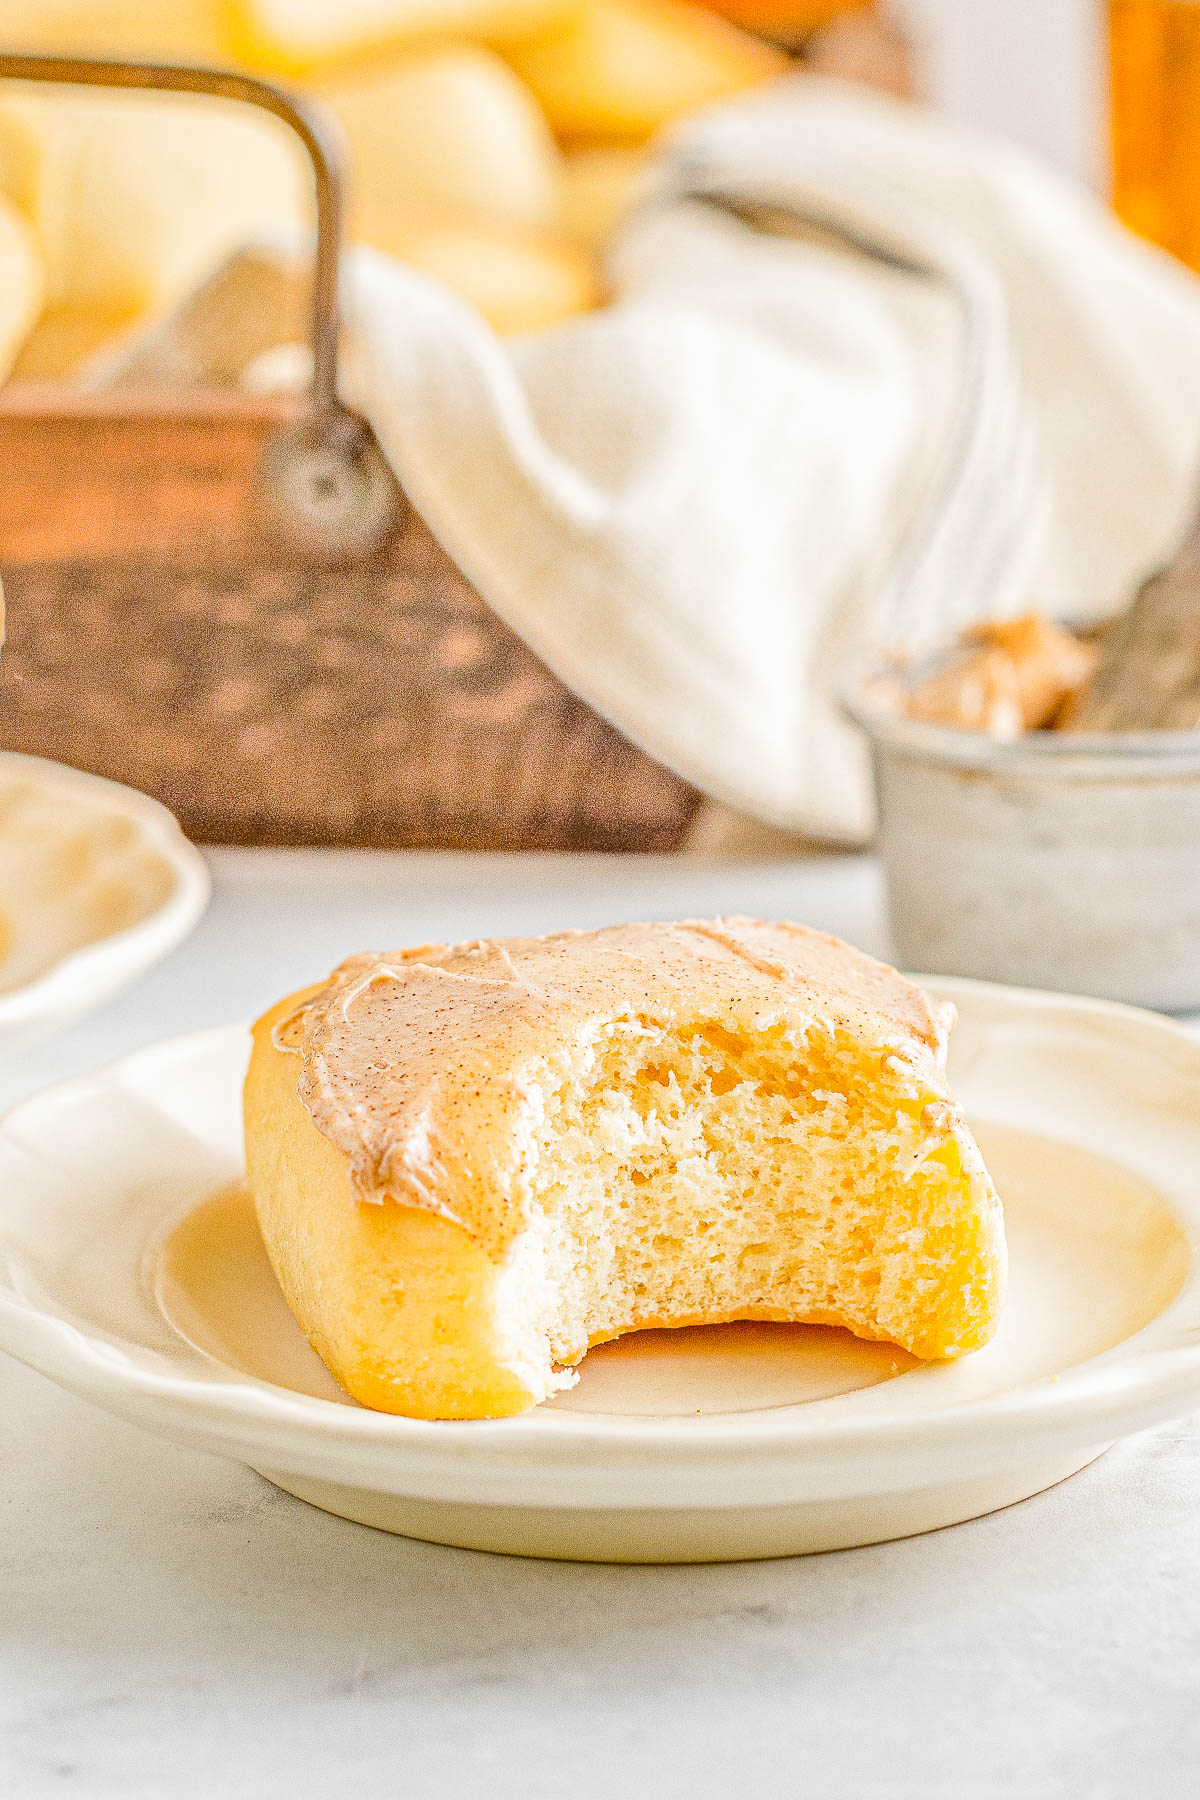 Texas Roadhouse Rolls - Soft, buttery, fluffy, and light this easy COPYCAT recipe for Texas Roadhouse rolls with cinnamon honey butter is INCREDIBLE! Perfect for family gatherings, holiday meals, or anytime you're craving warm homemade dinner rolls! An approachable recipe even for those who have never made dinner rolls and are novices.